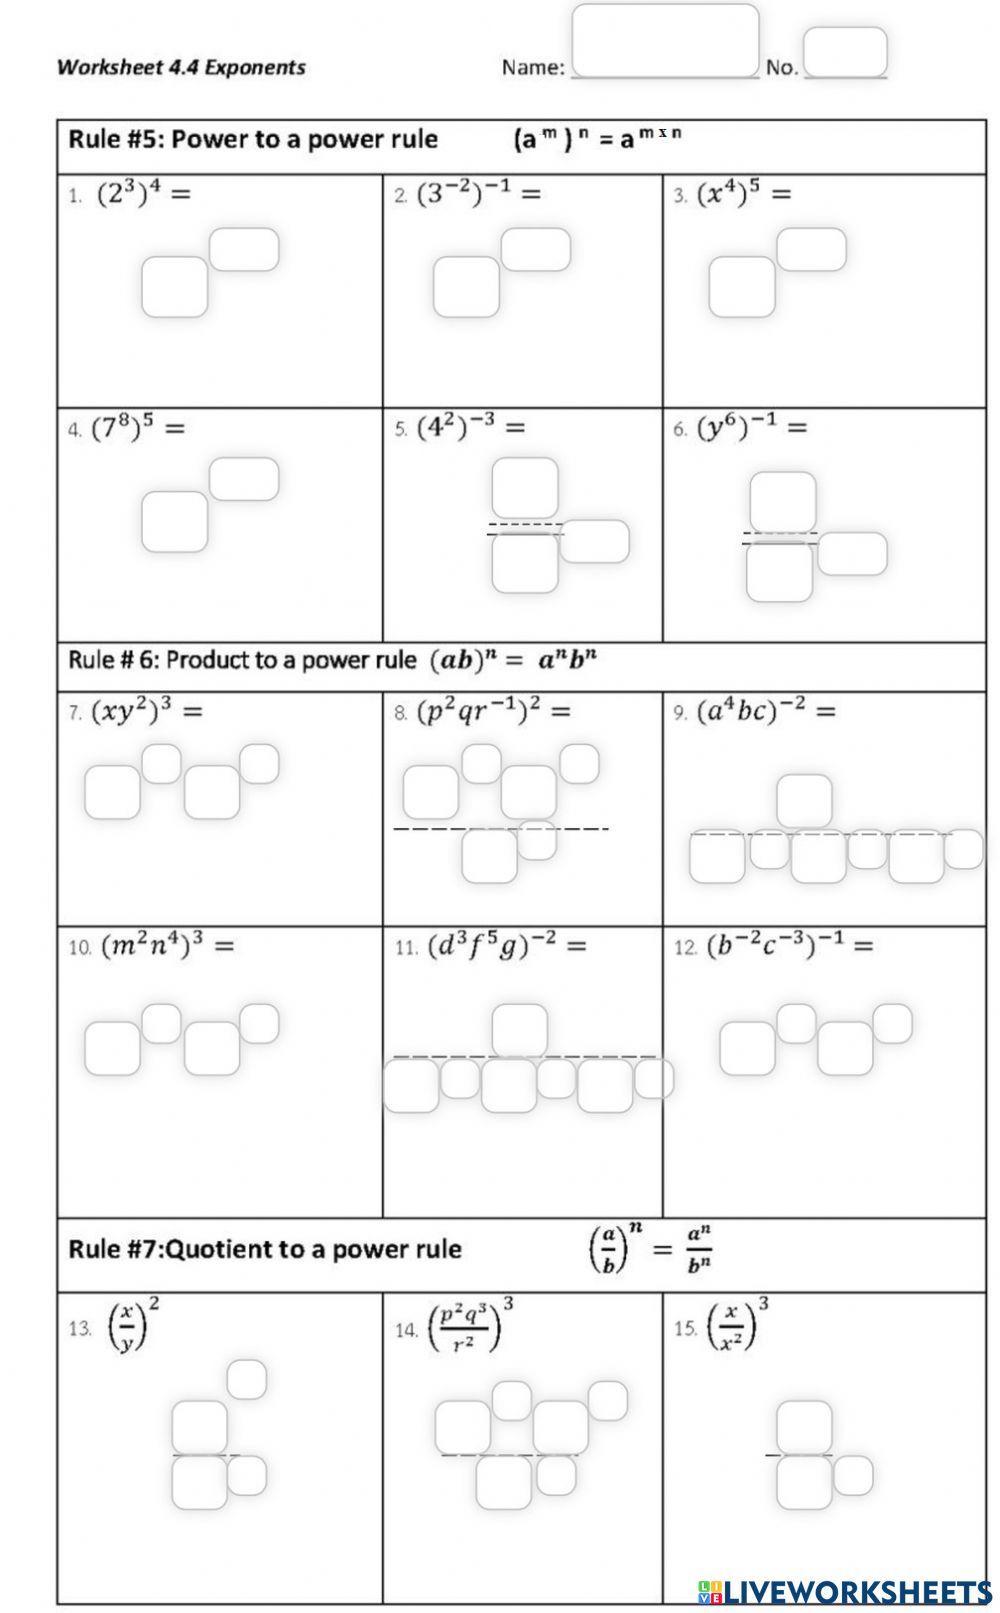 Worksheet 4.4  Exponents ( rules 5 -7 )